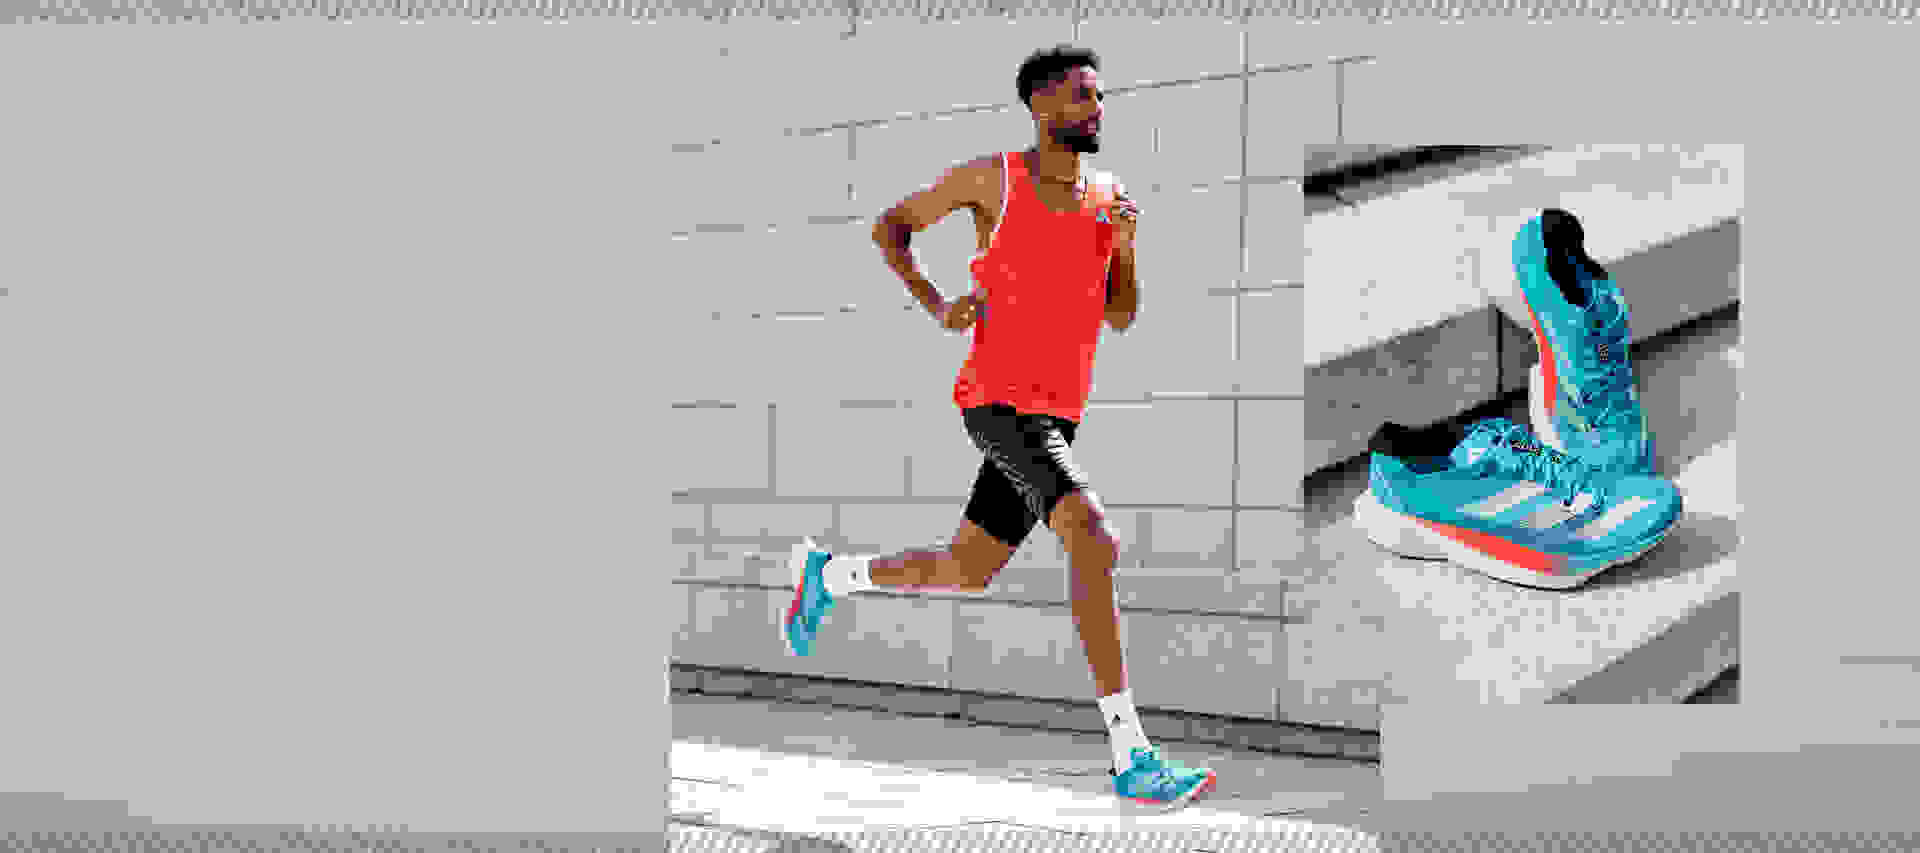 Image of a runner in action and an image of a shoe.